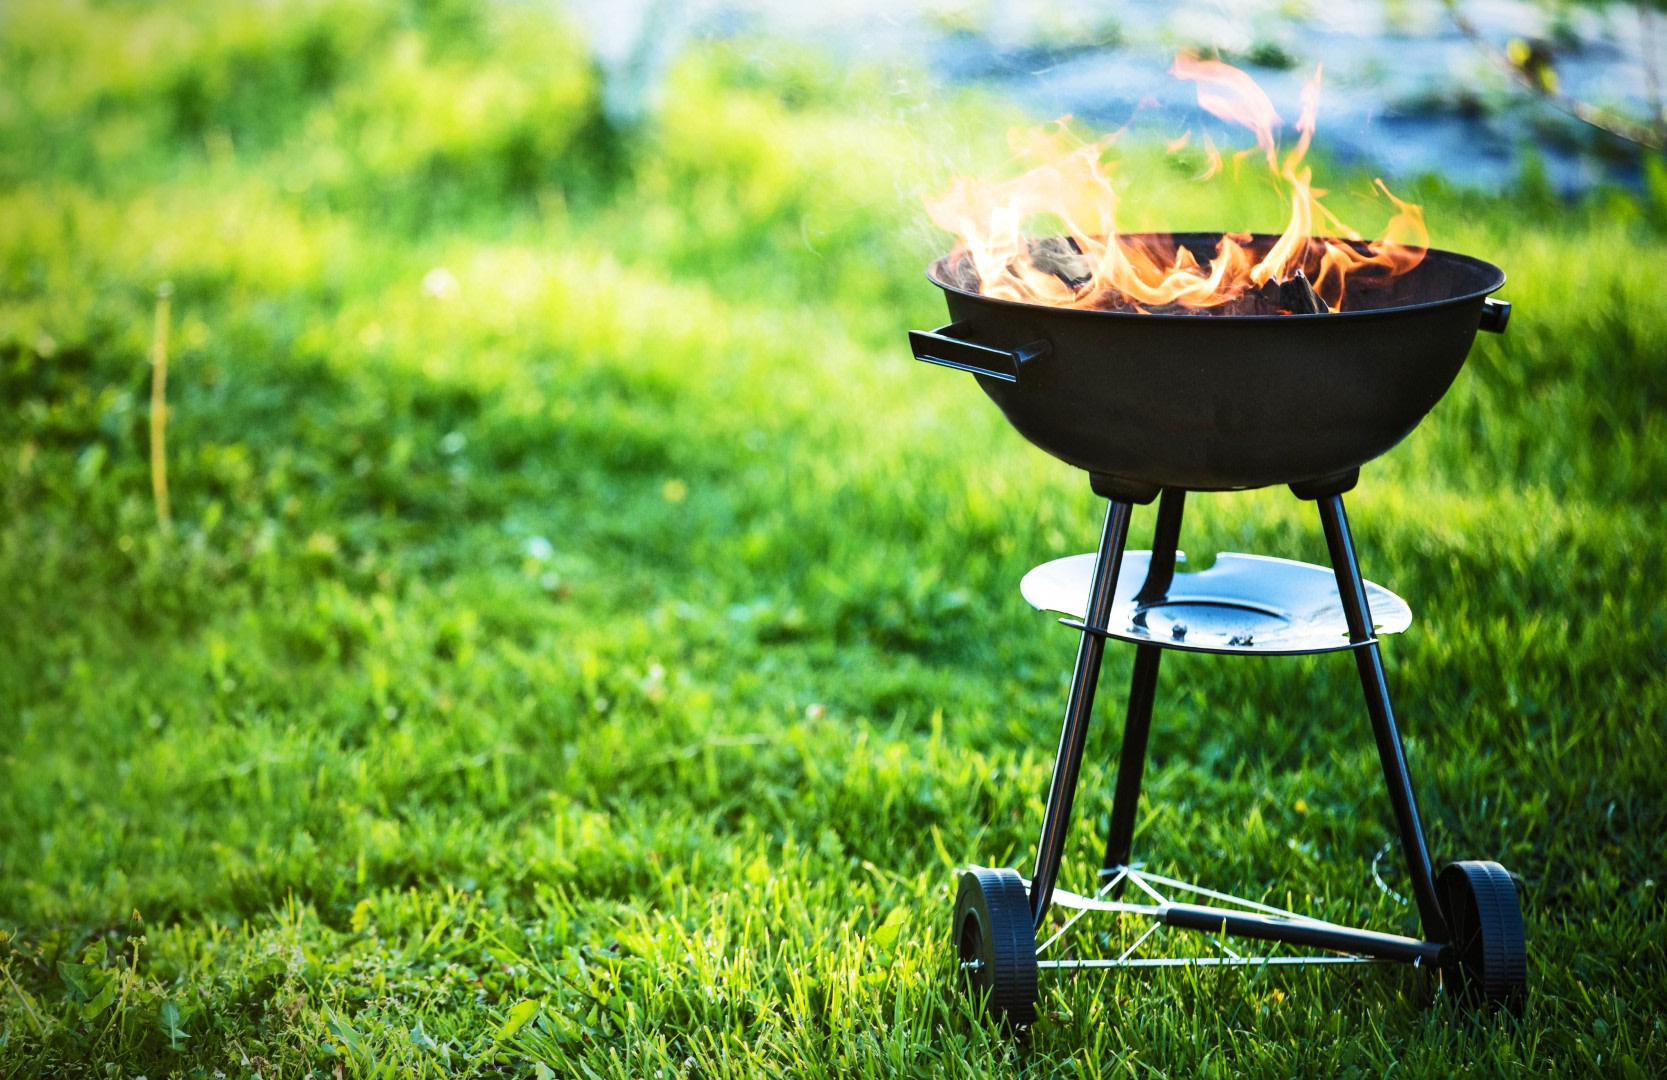 An image related to Best Large Portable Grills